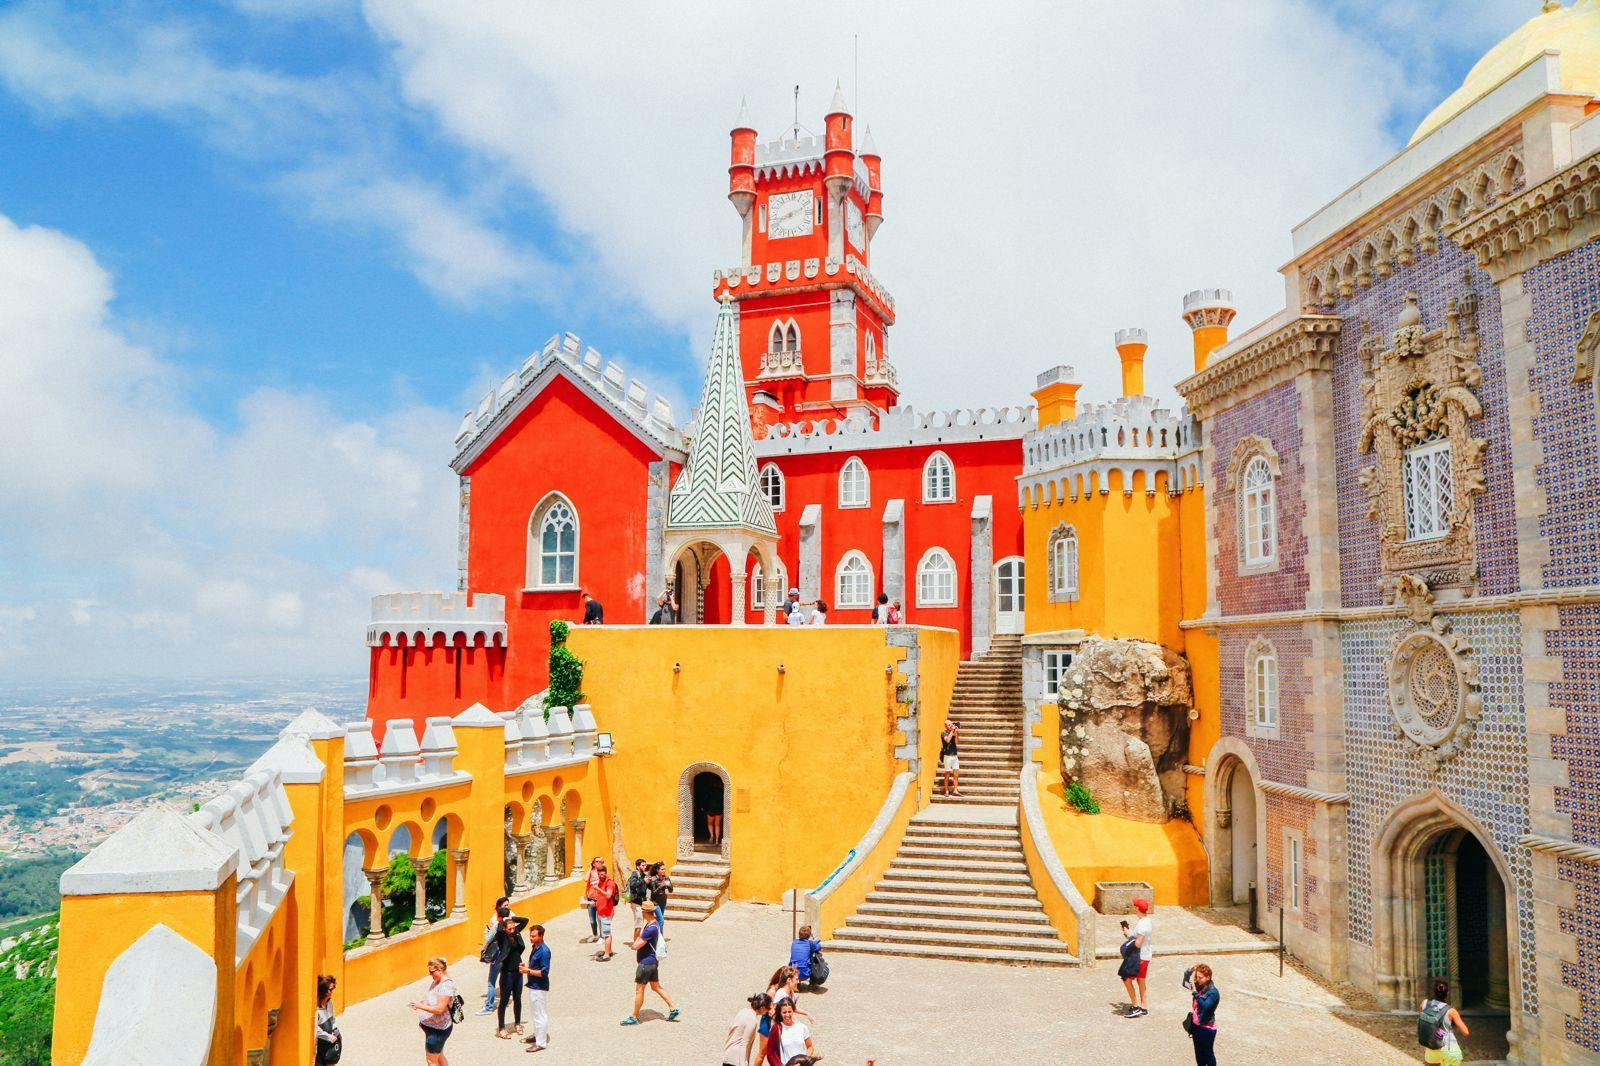 Colourful Sintra Castle during the annual Sintra Festival.